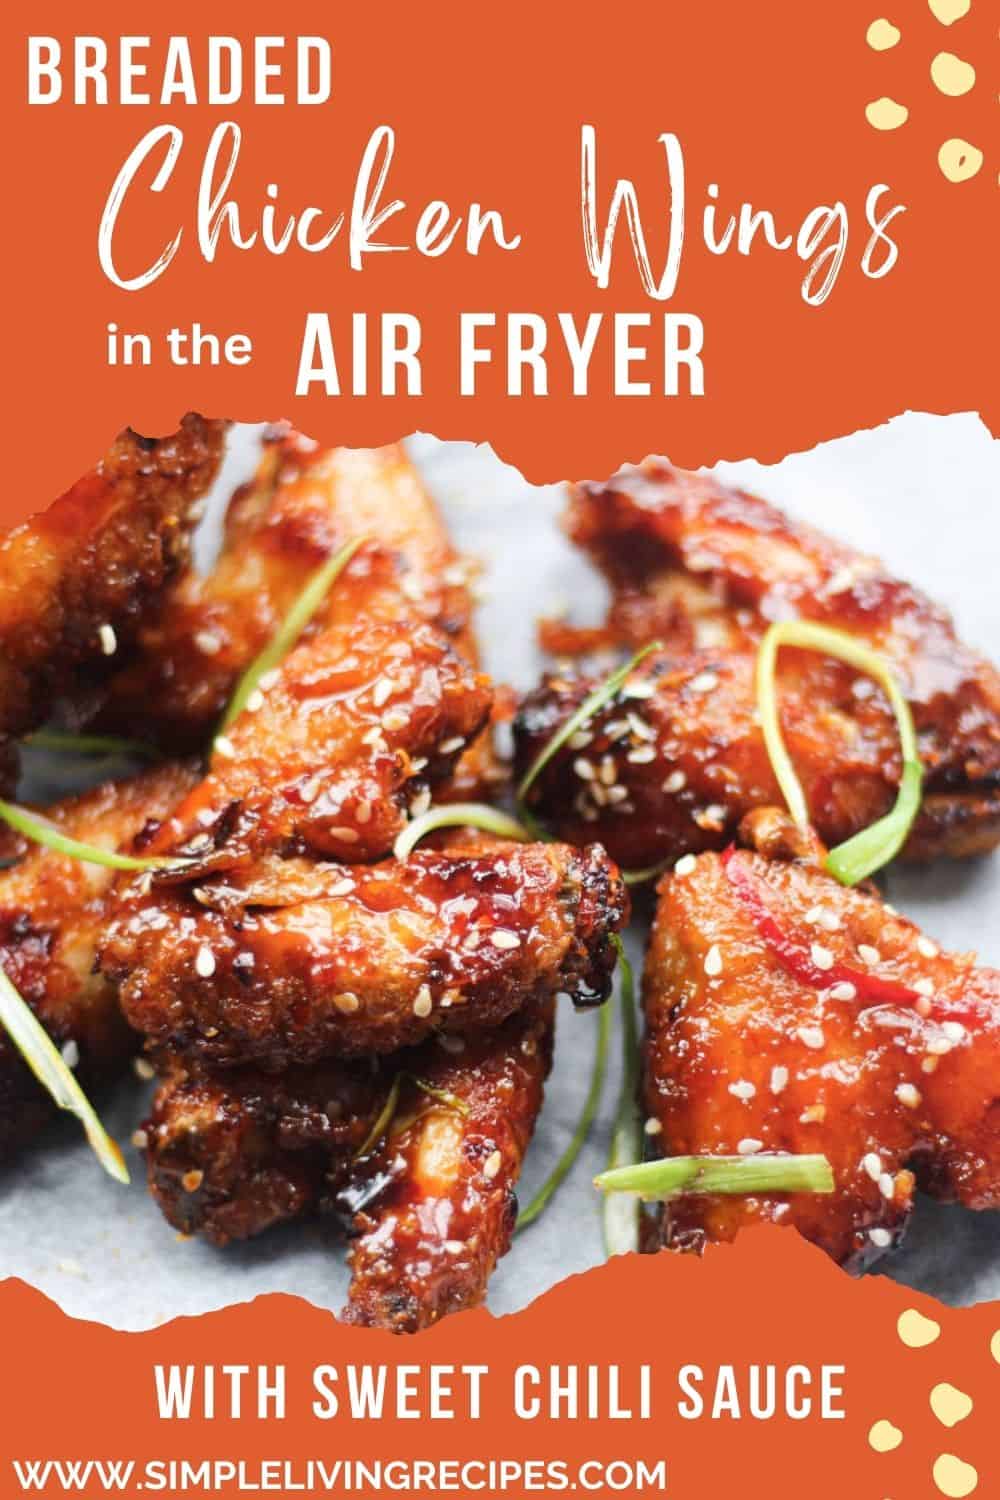 Breaded chicken wings in the air fryer with sweet chili sauce pin for Pinterest